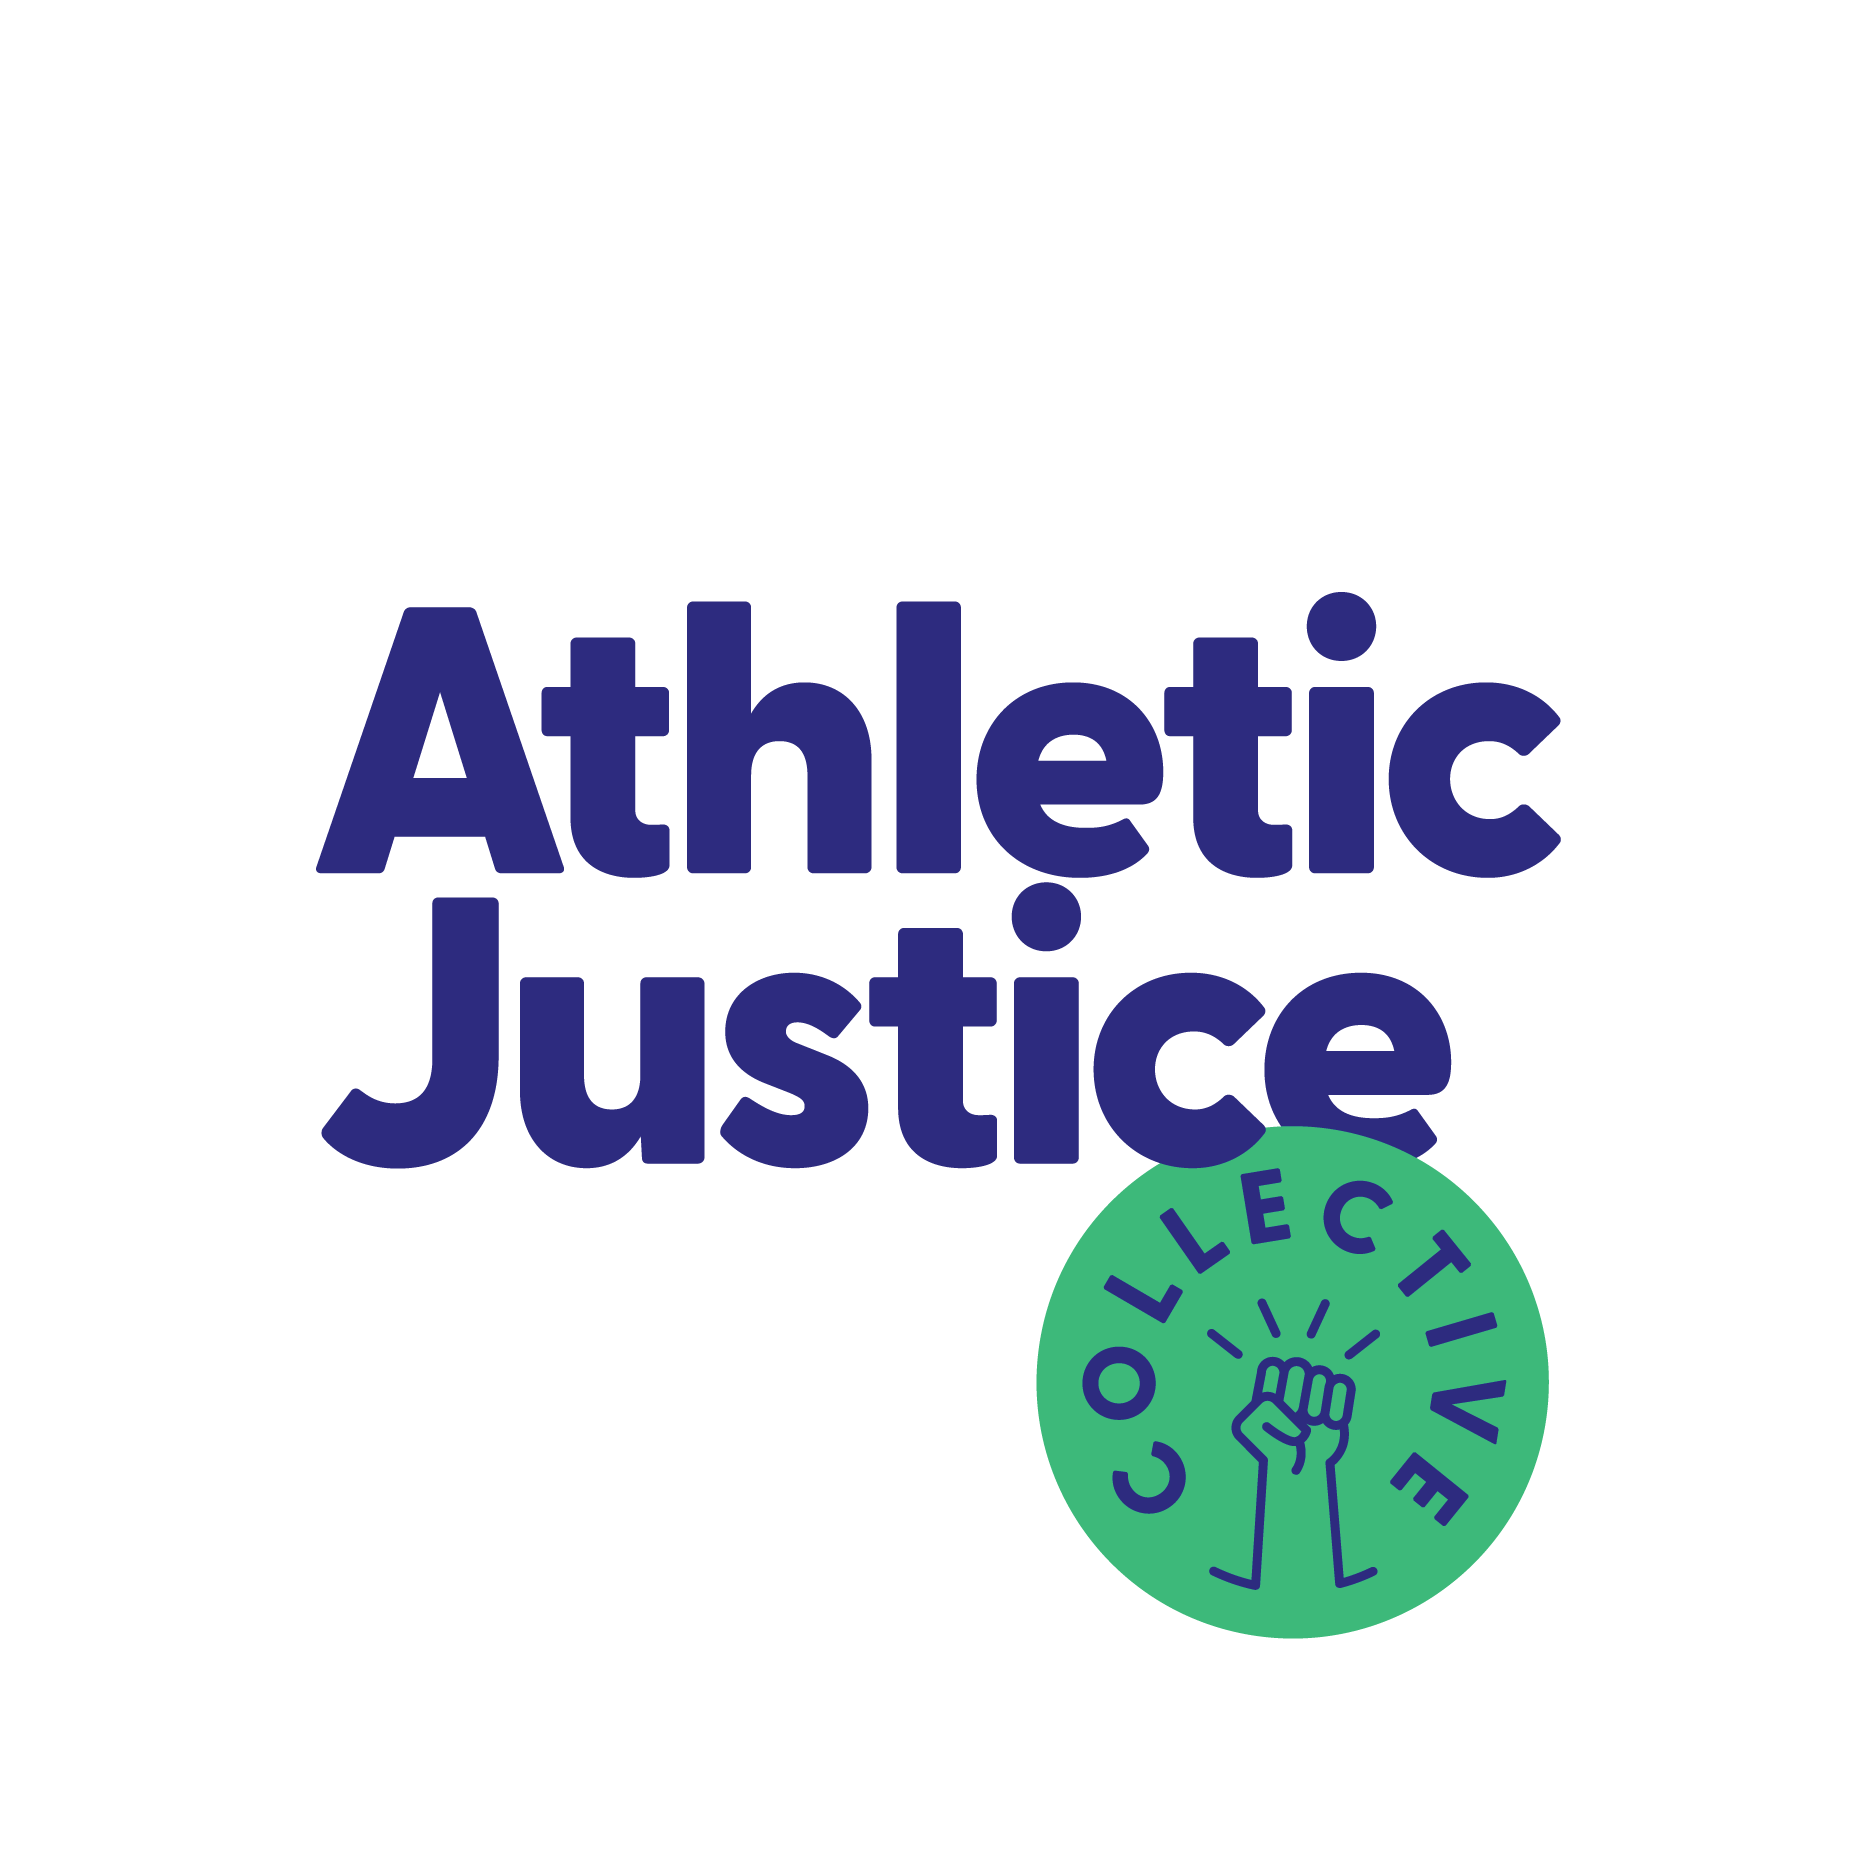 2021LogoLounge_Athletic_Justice copy logo design by logo designer Hay & Co. Design for your inspiration and for the worlds largest logo competition